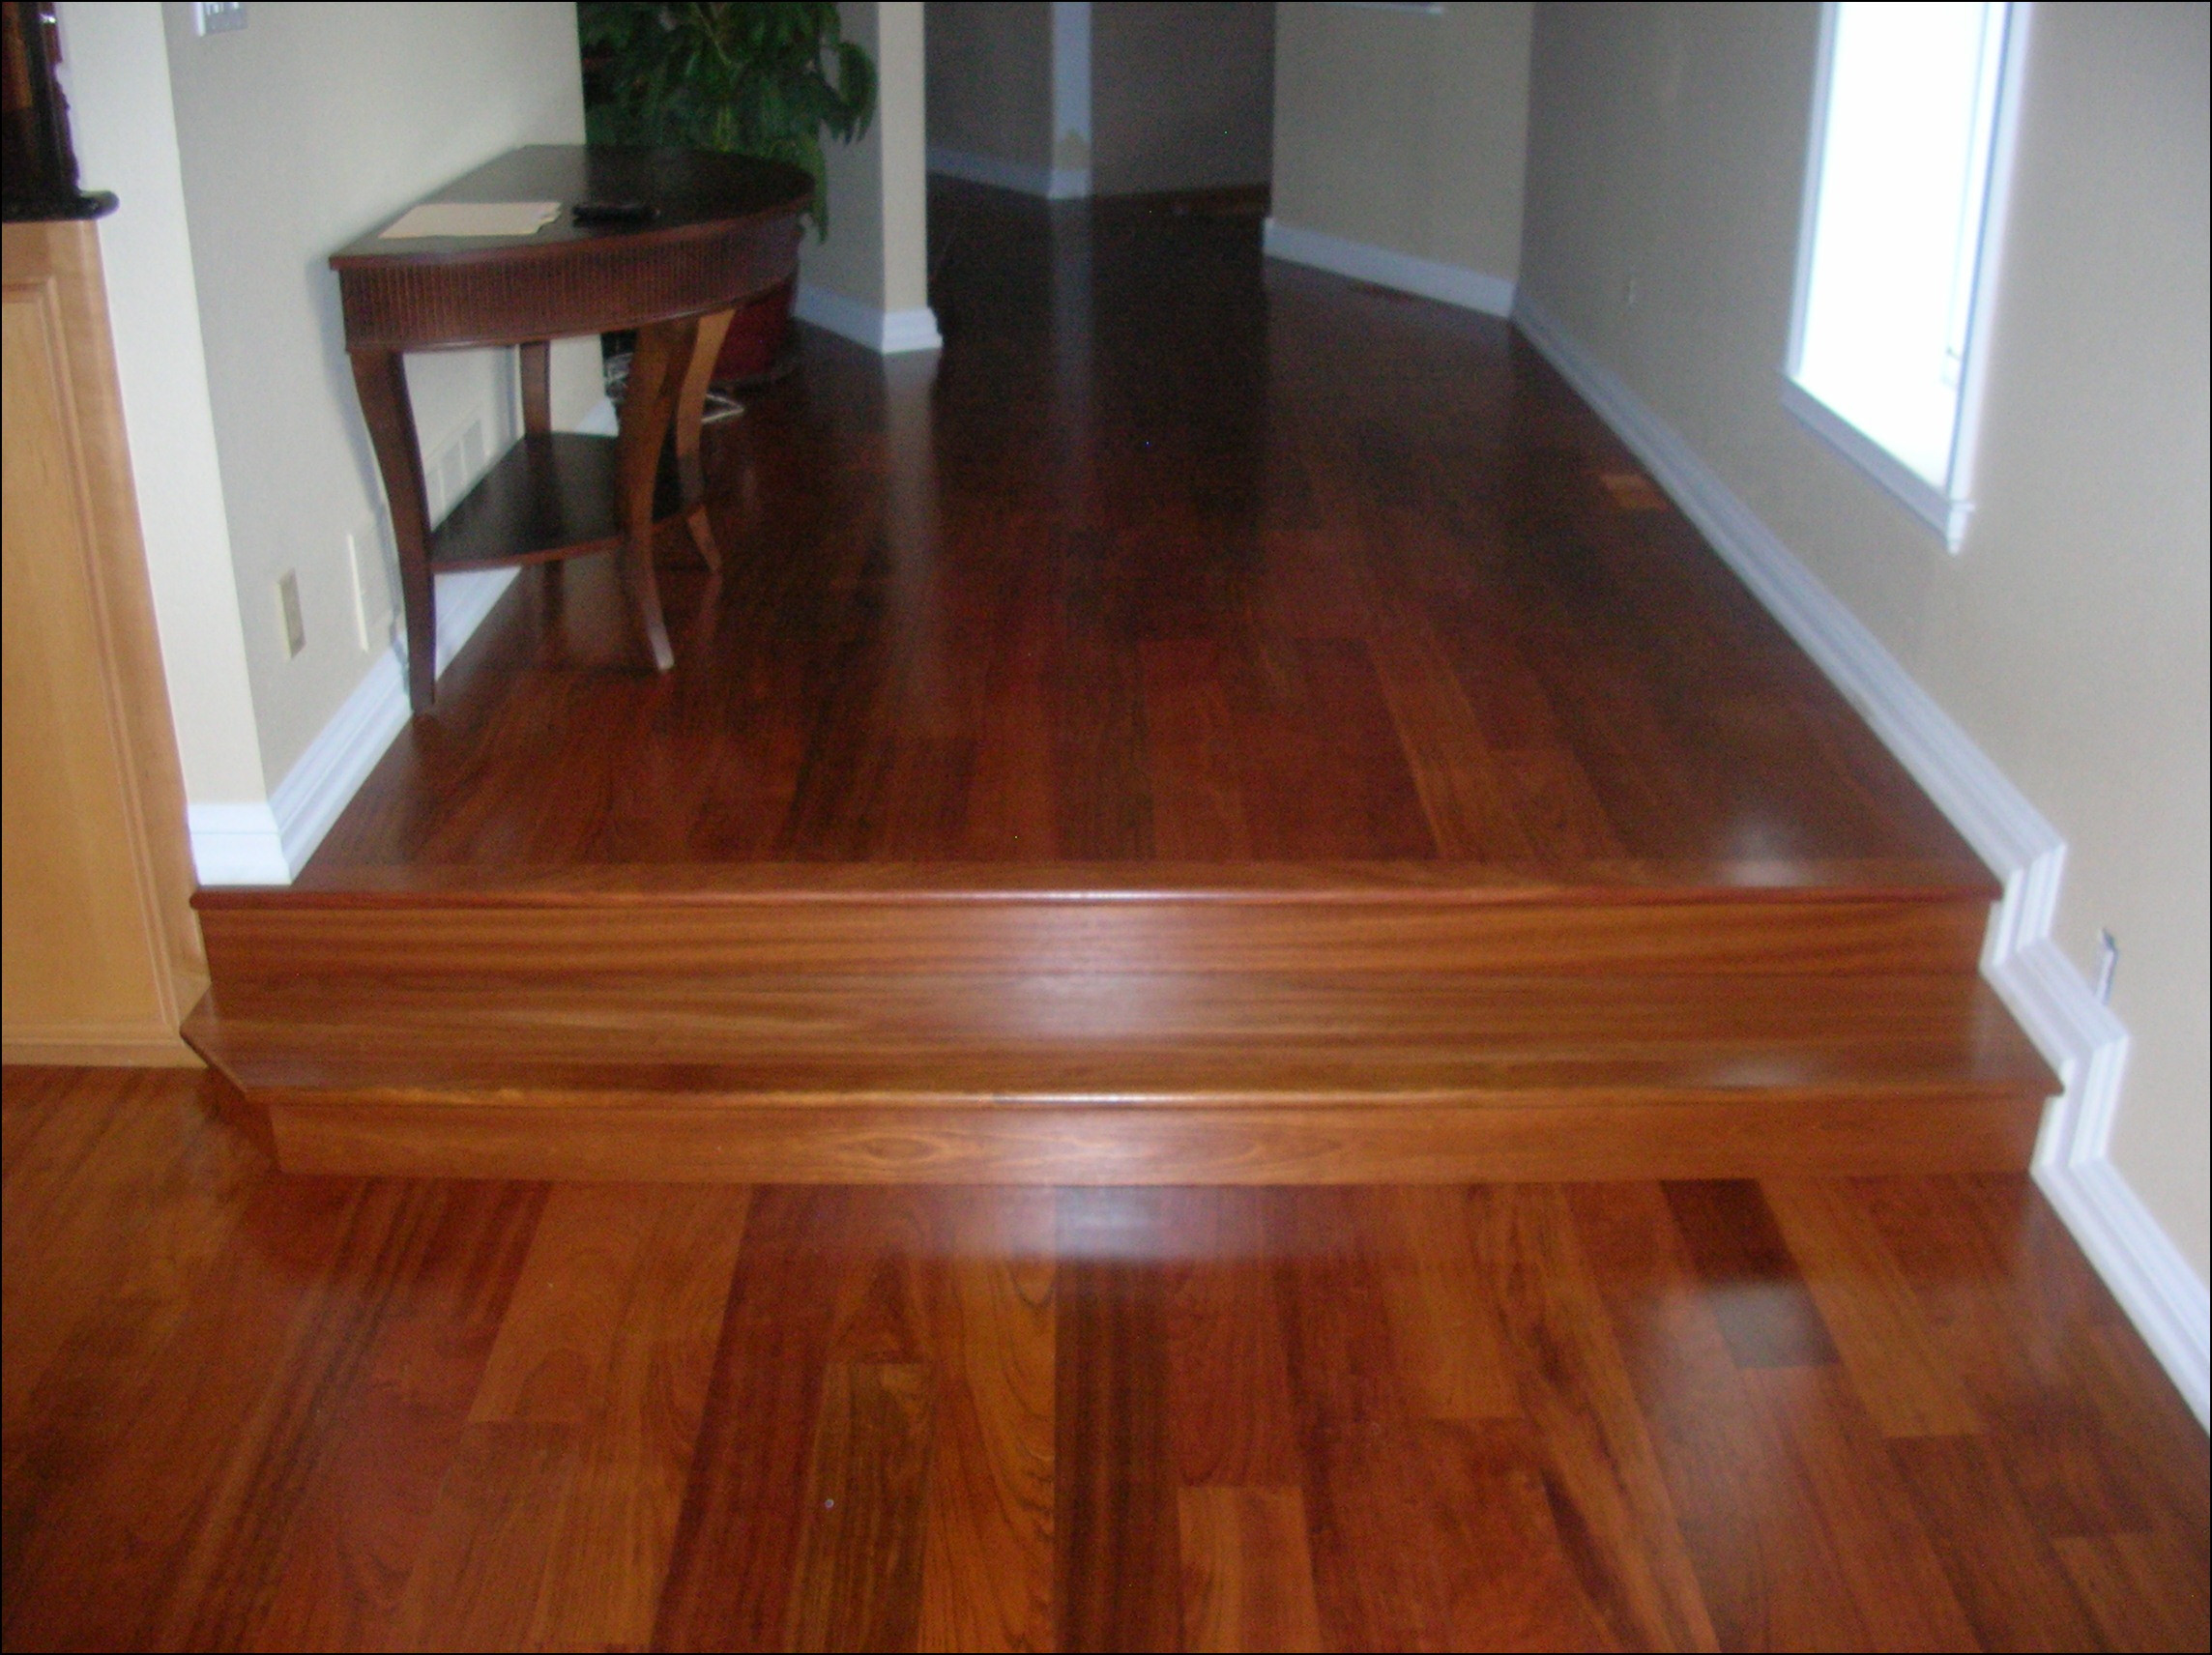 15 Awesome Hardwood Floor Refinishing Tulsa Ok 2022 free download hardwood floor refinishing tulsa ok of best place flooring ideas with regard to best place to buy engineered hardwood flooring stock ideal floors no carpet other then area carpet